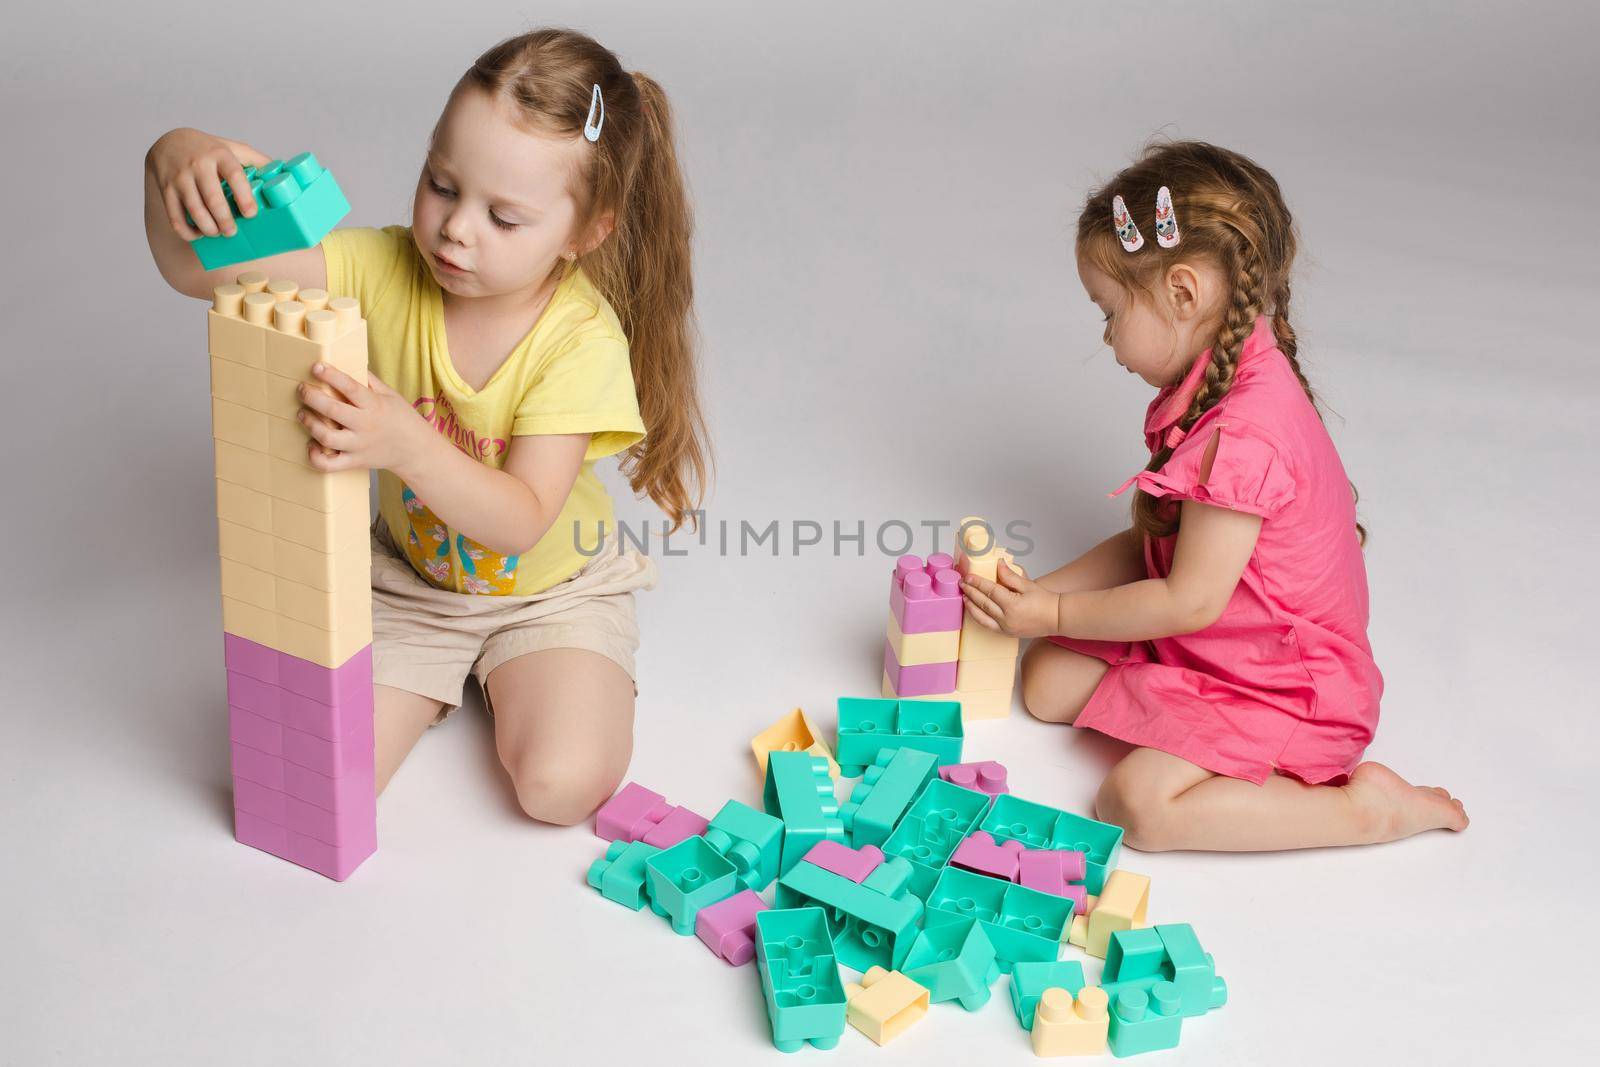 View from side of two cute girls sitting on floor and playing with building blocks in studio. Little children enjoying game, talking and smiling on isolated background. Concept of joy and activity.